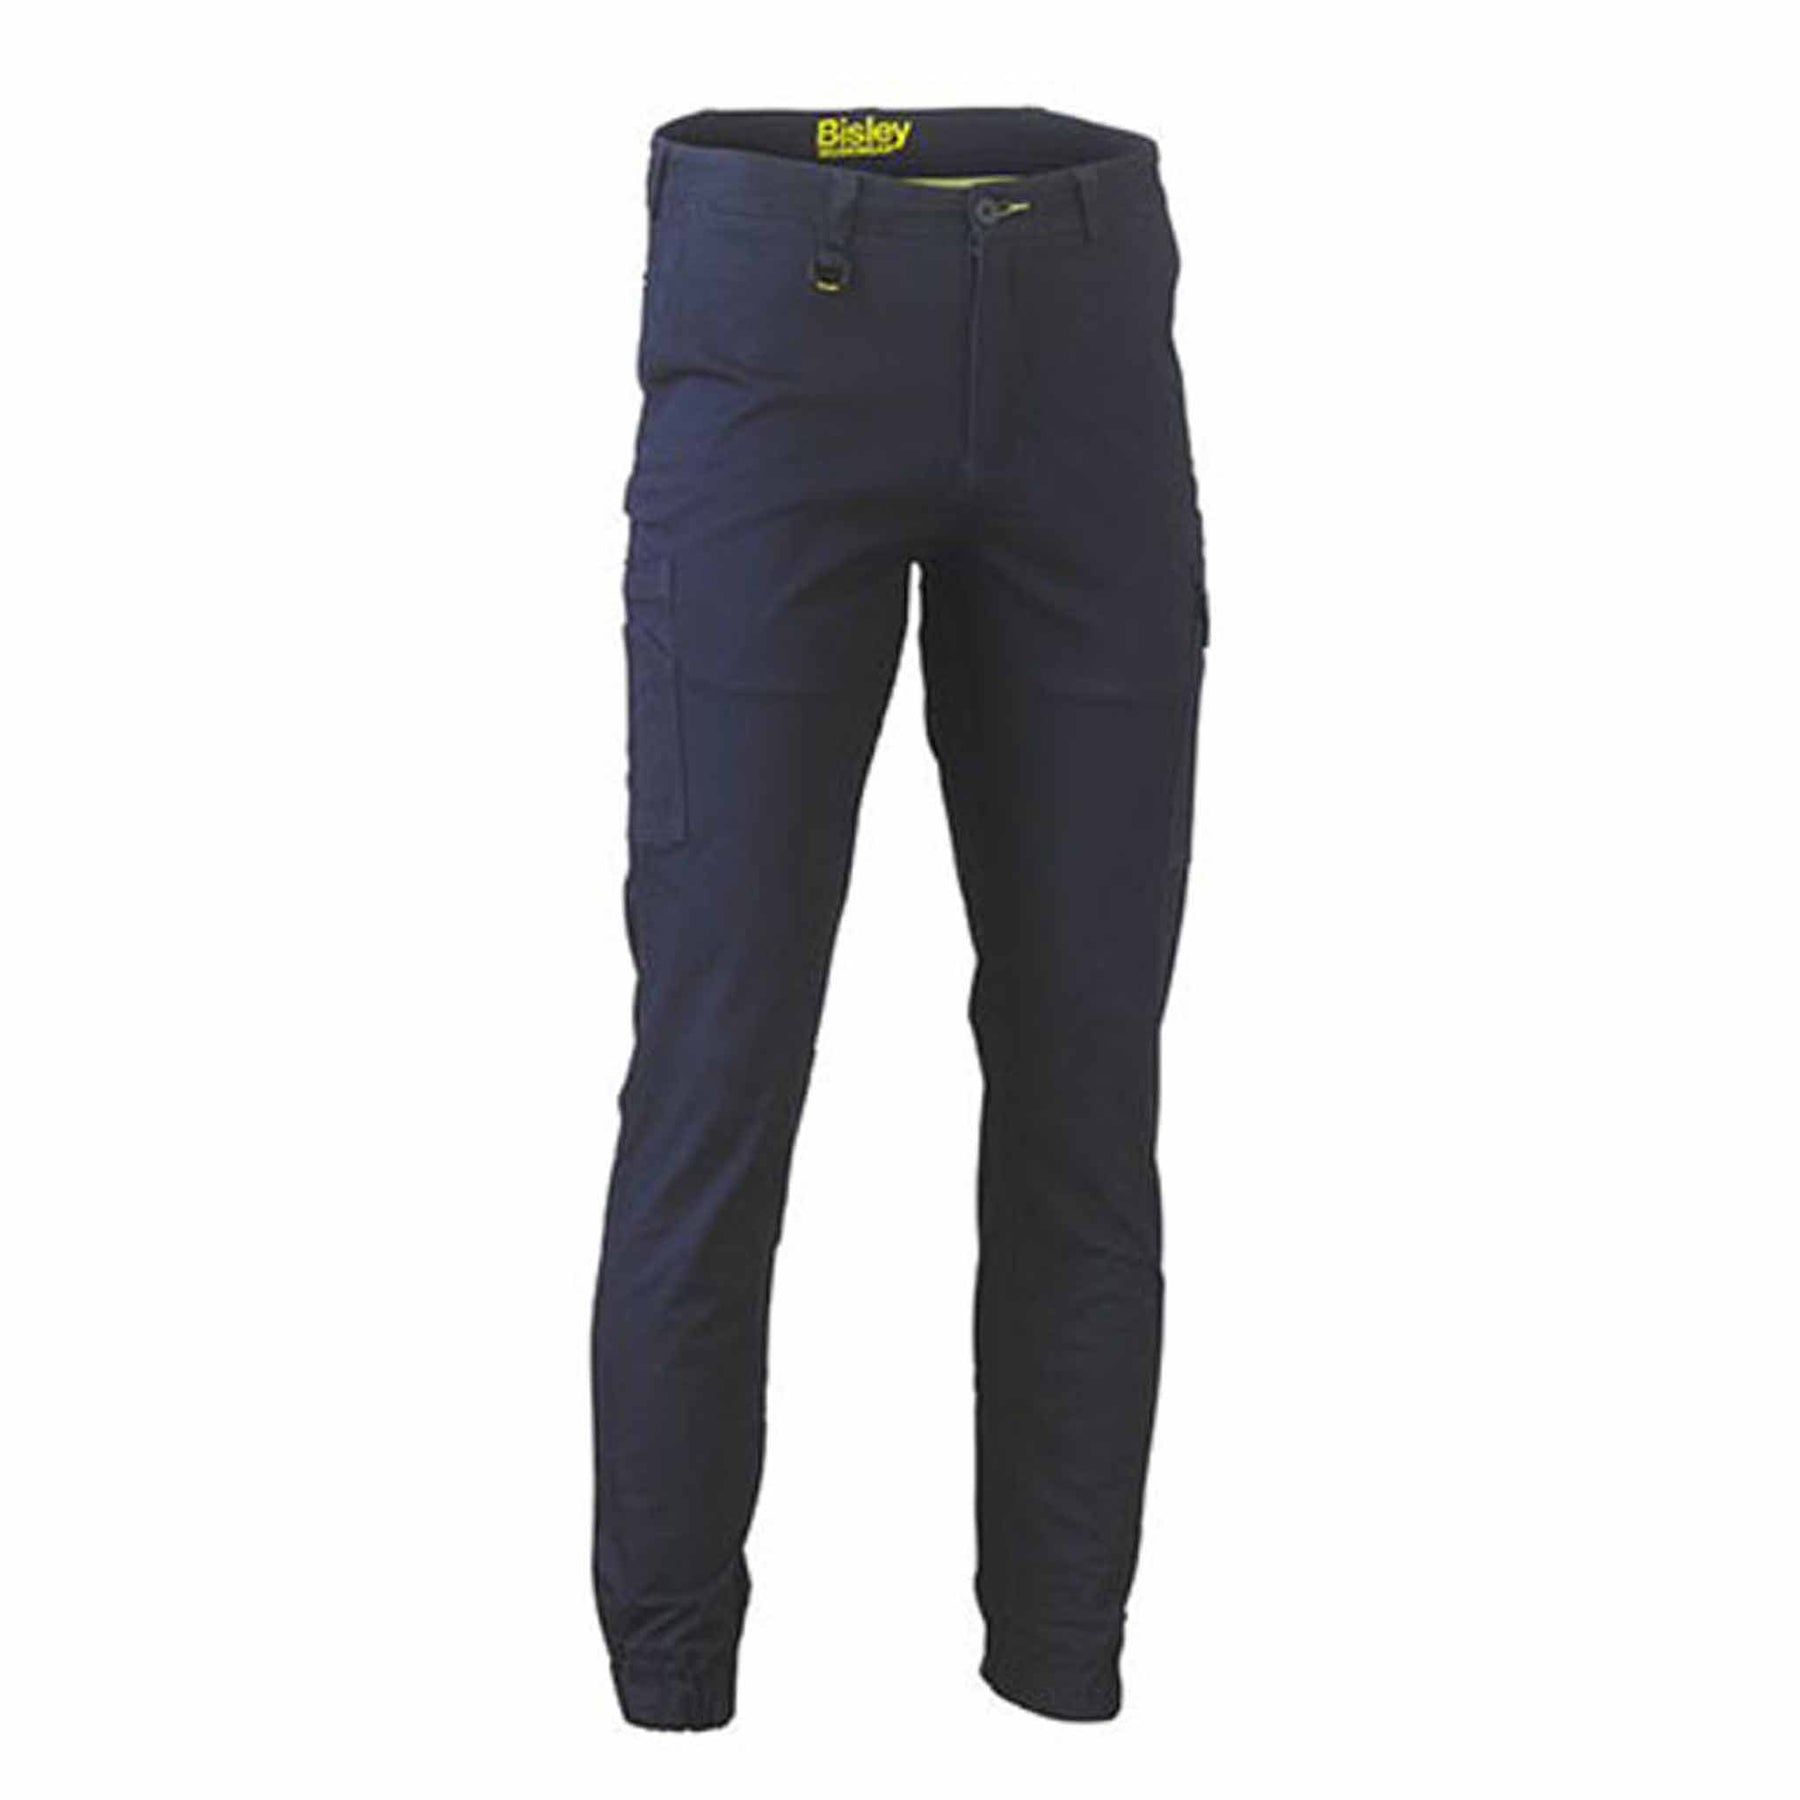 bisley stretch cotton drill cargo cuffed pants in navy